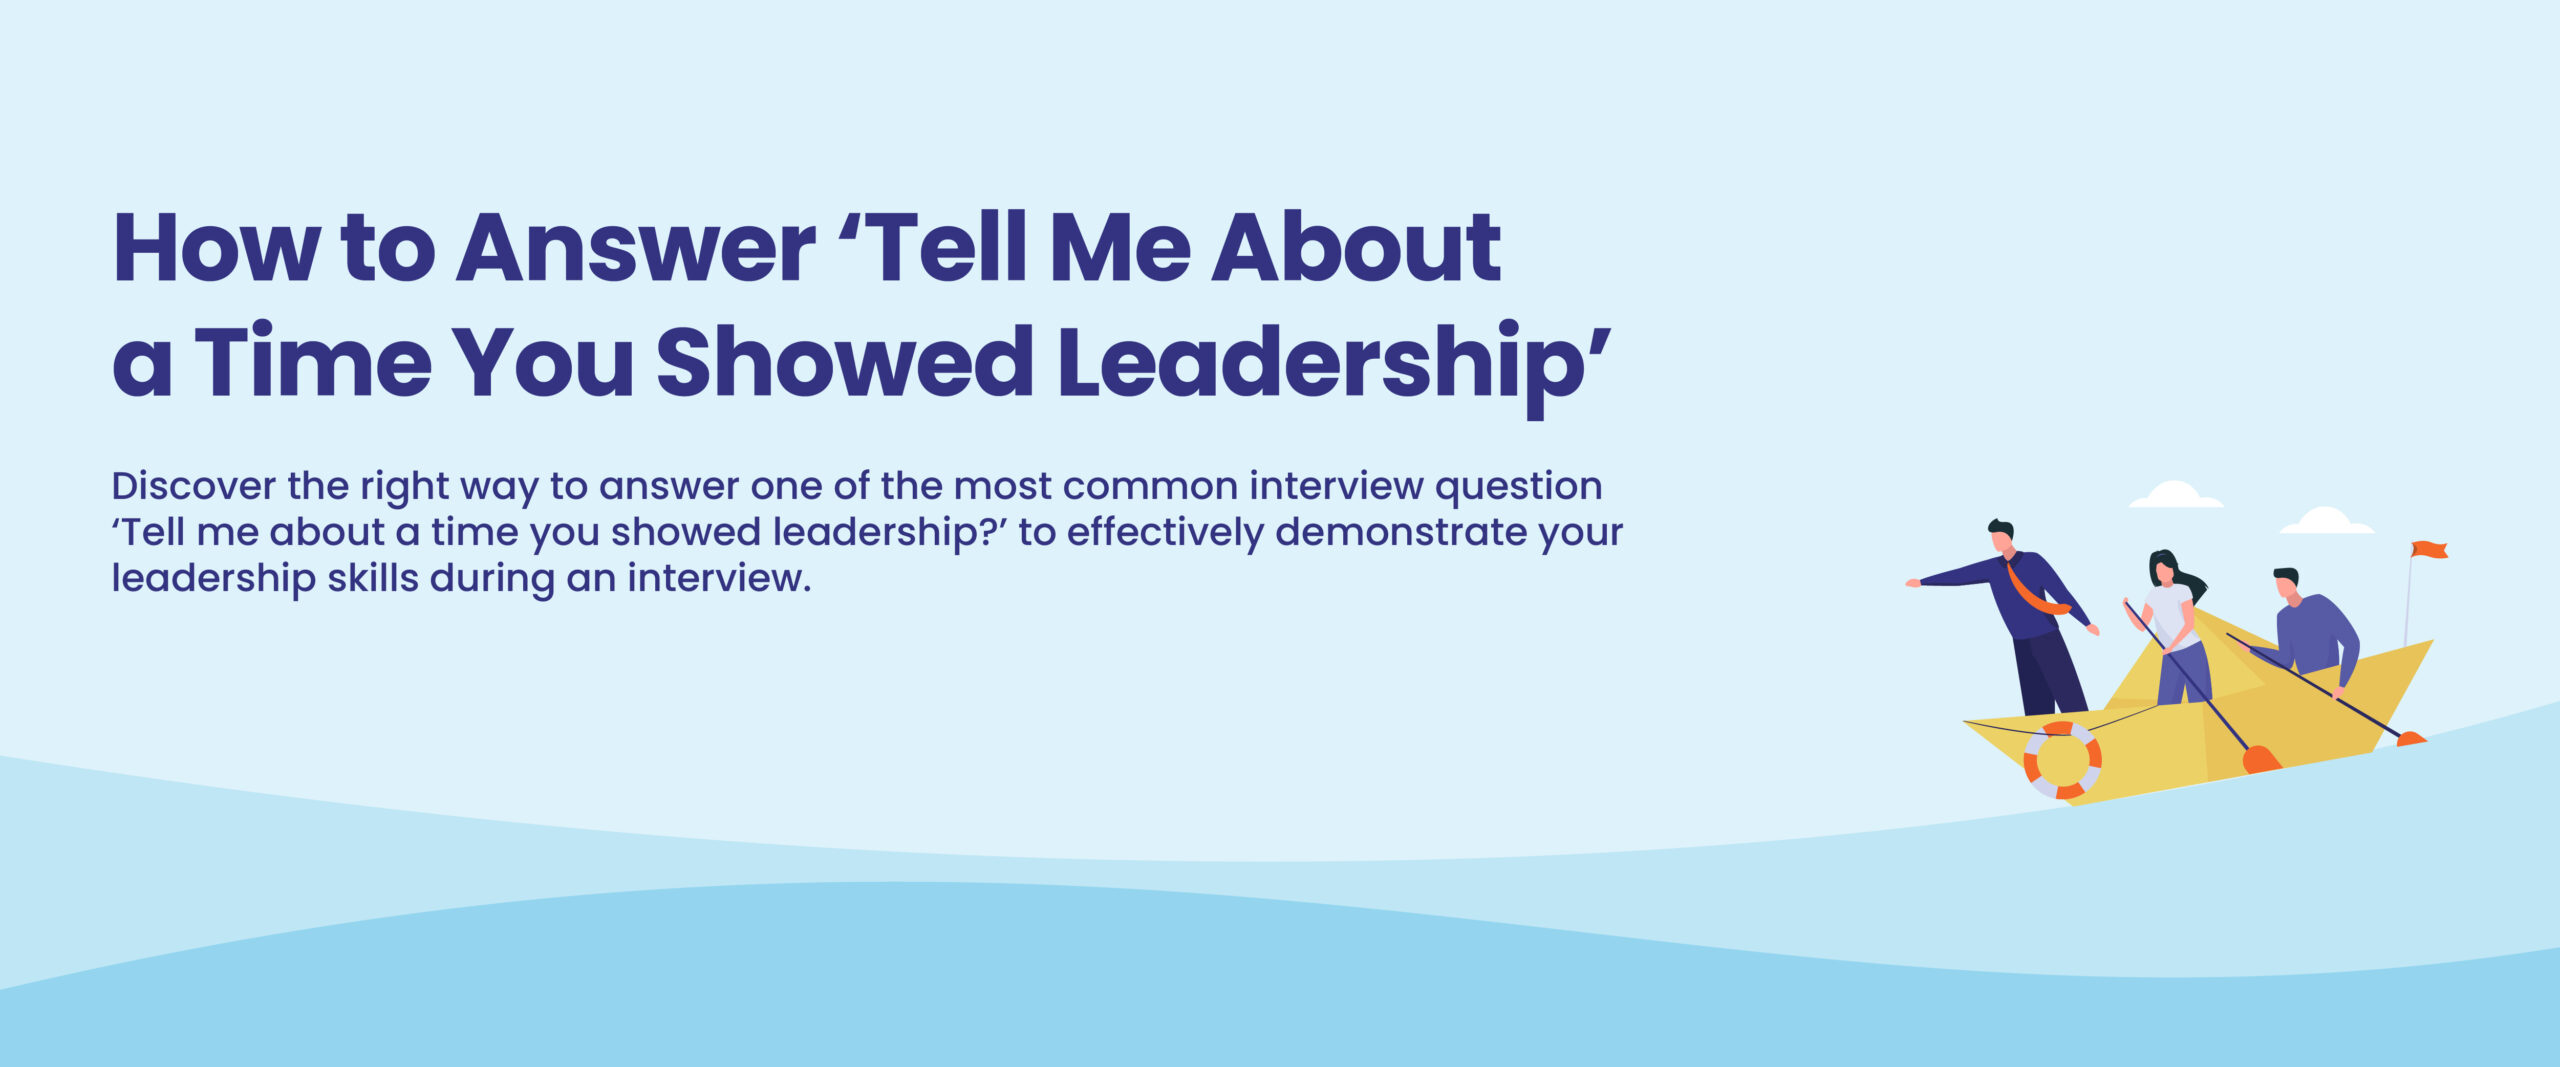 Tell Me About a Time You Showed Leadership’